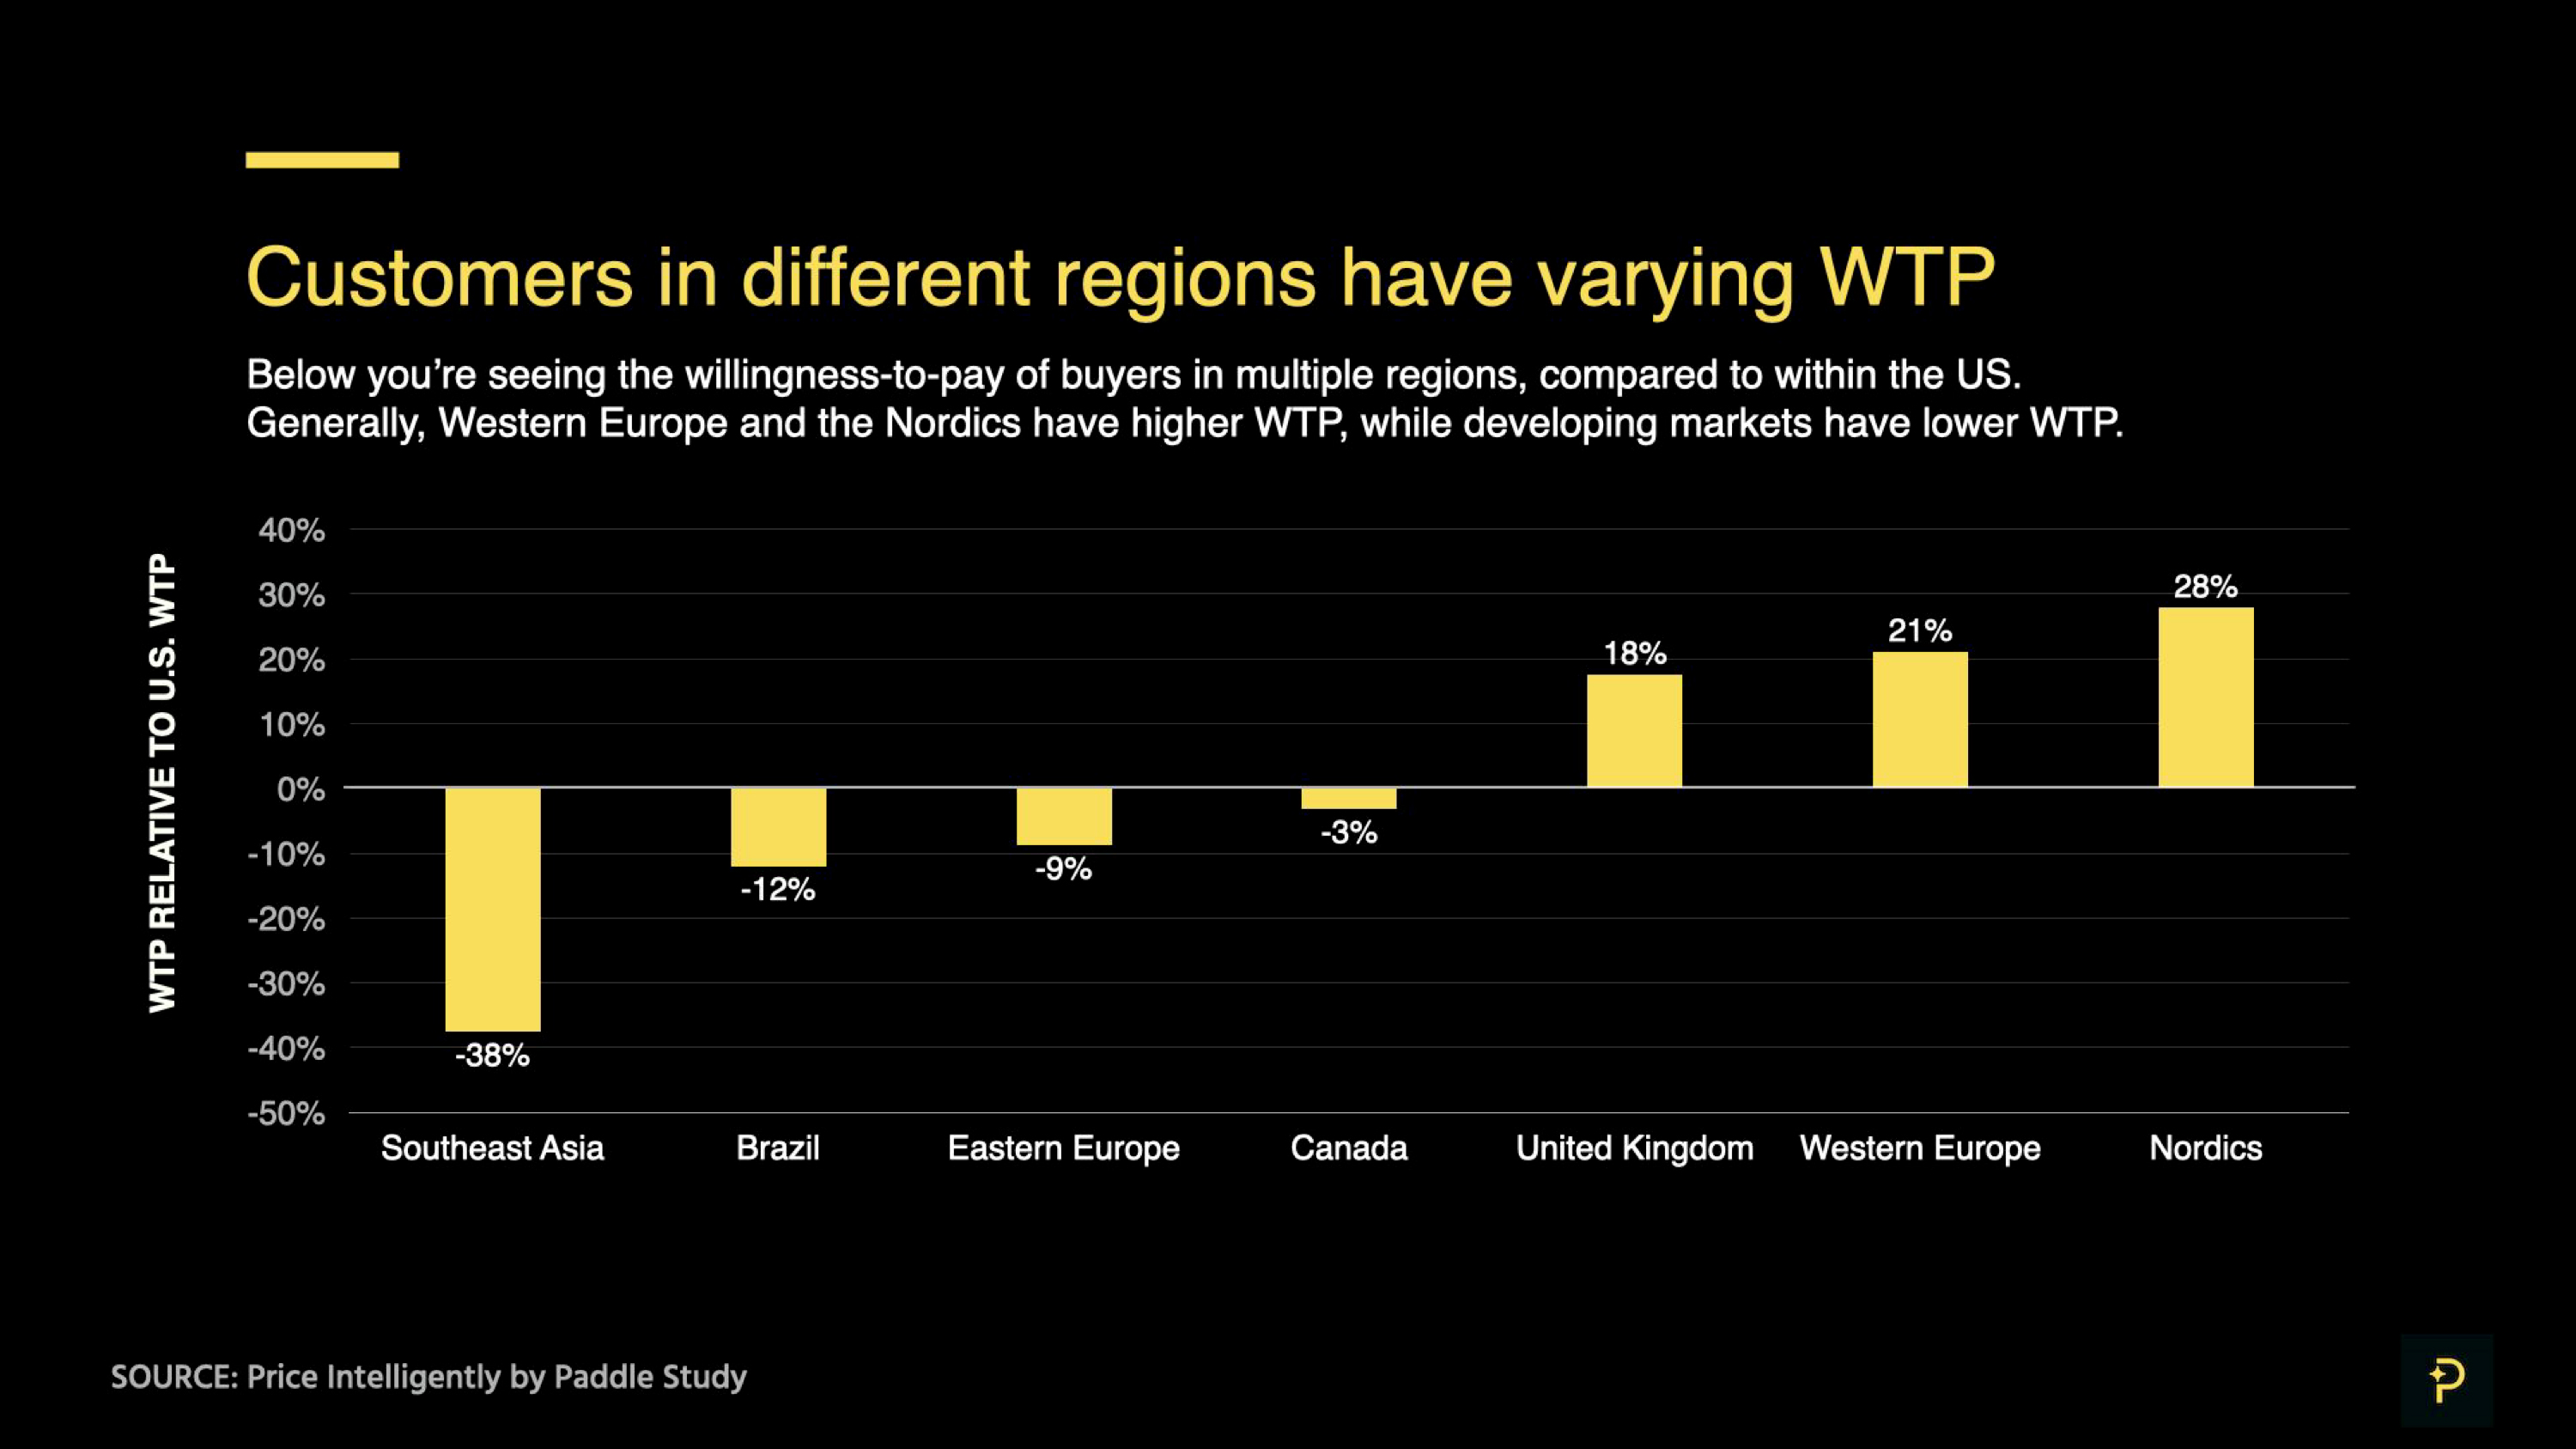 Customers in different regions have varying WTP